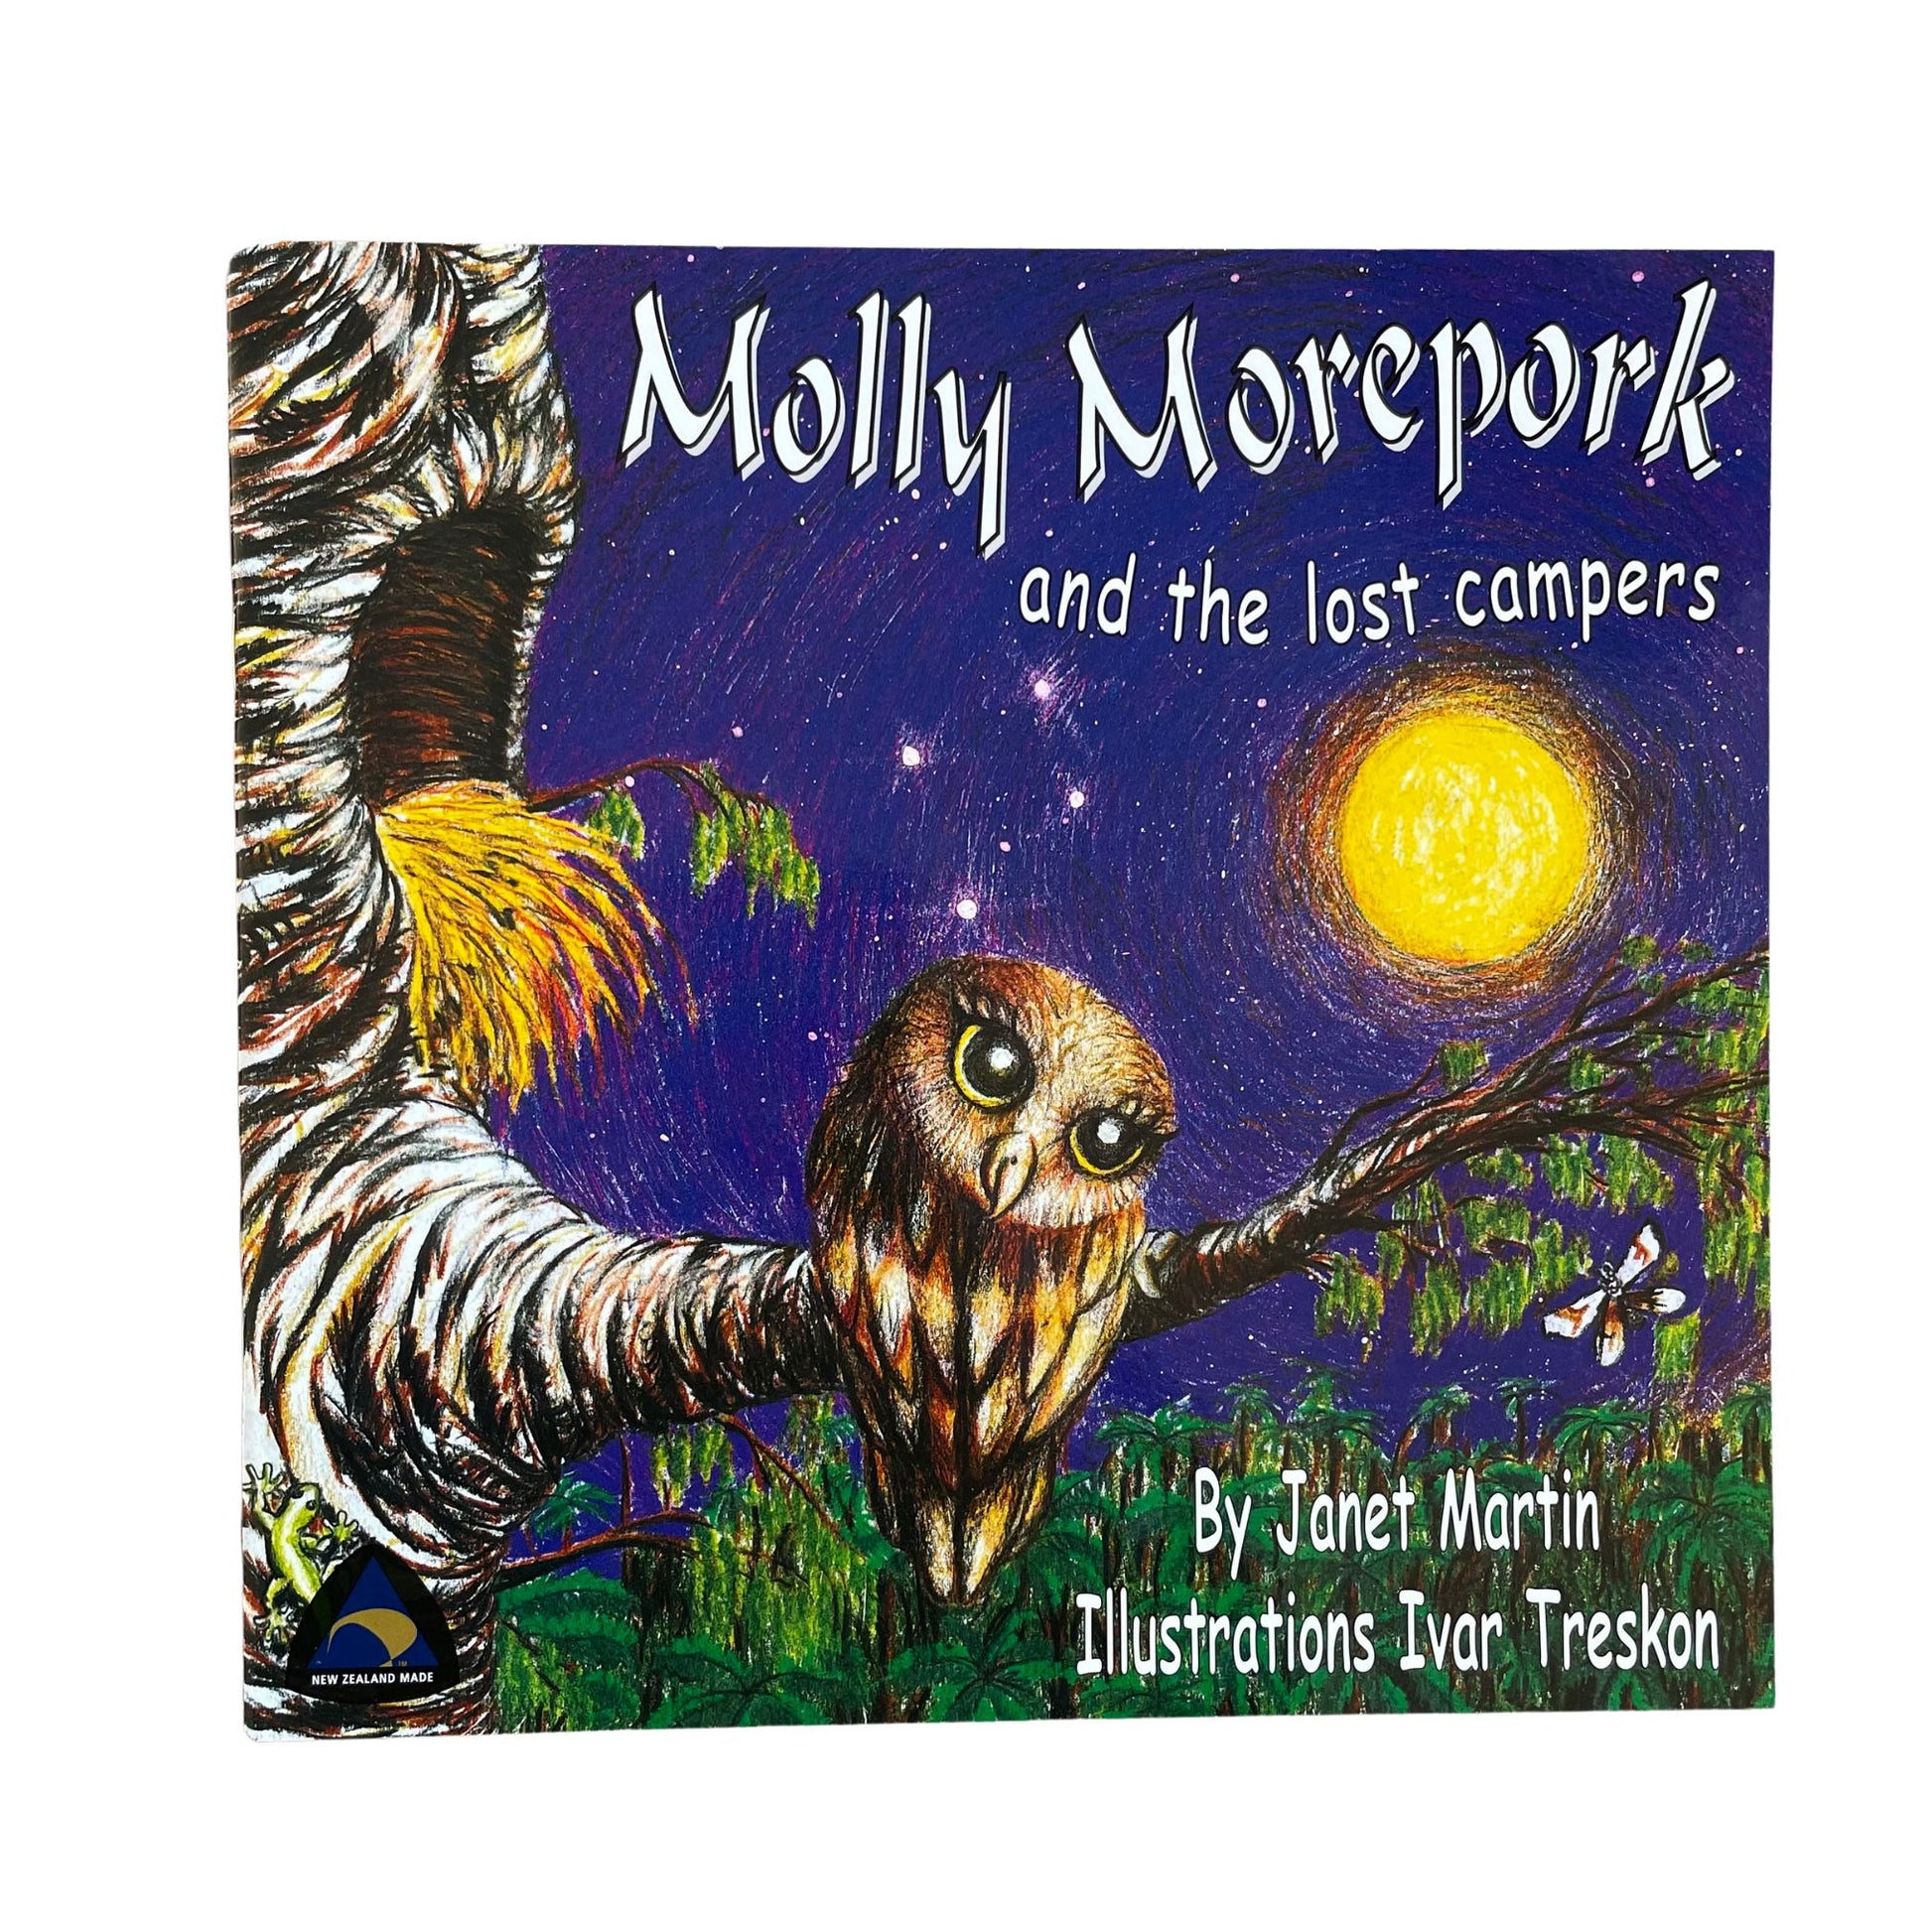 Molly the Morepork and the lost campers - Soft cover children's story book.